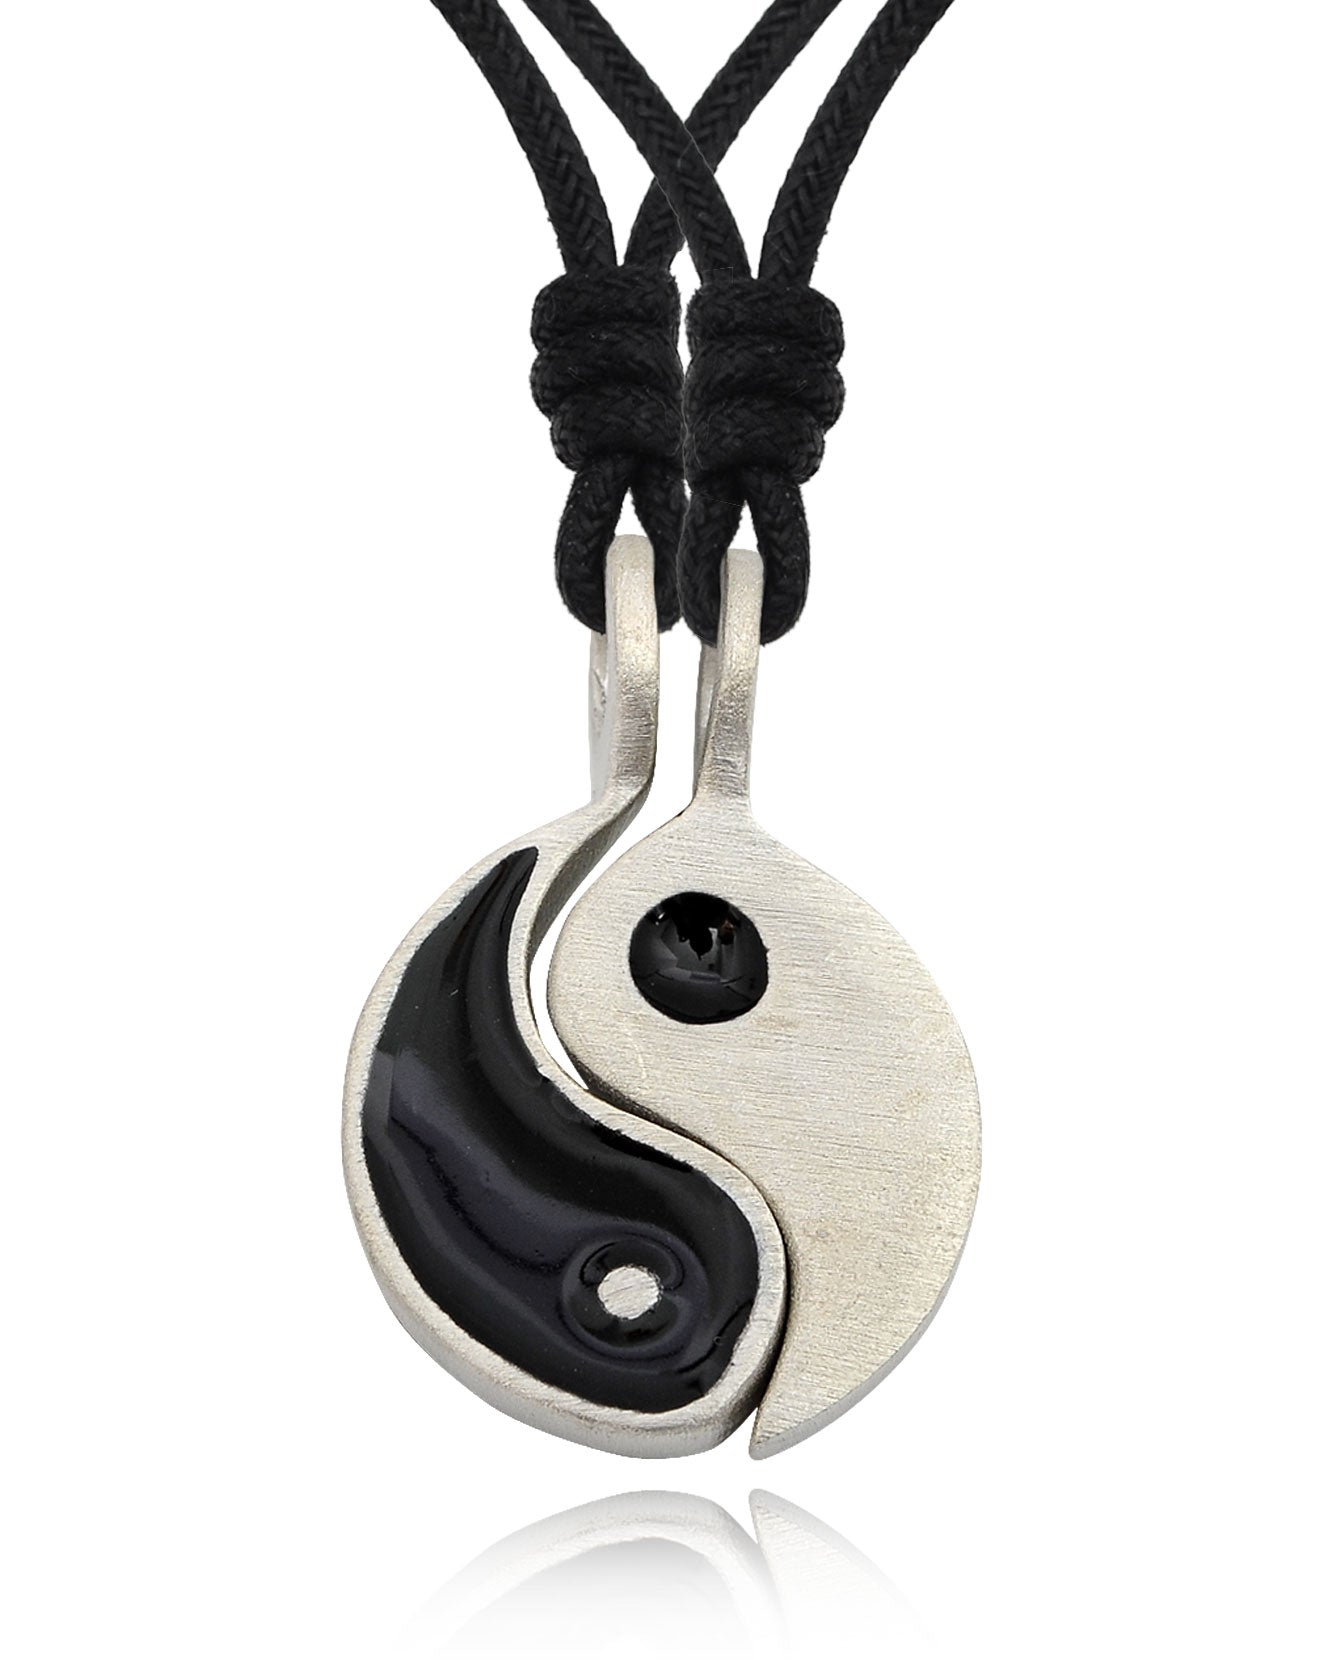 Colorful Ying Yang (2 Necklaces) Silver Pewter Necklace Pendant Jewelry